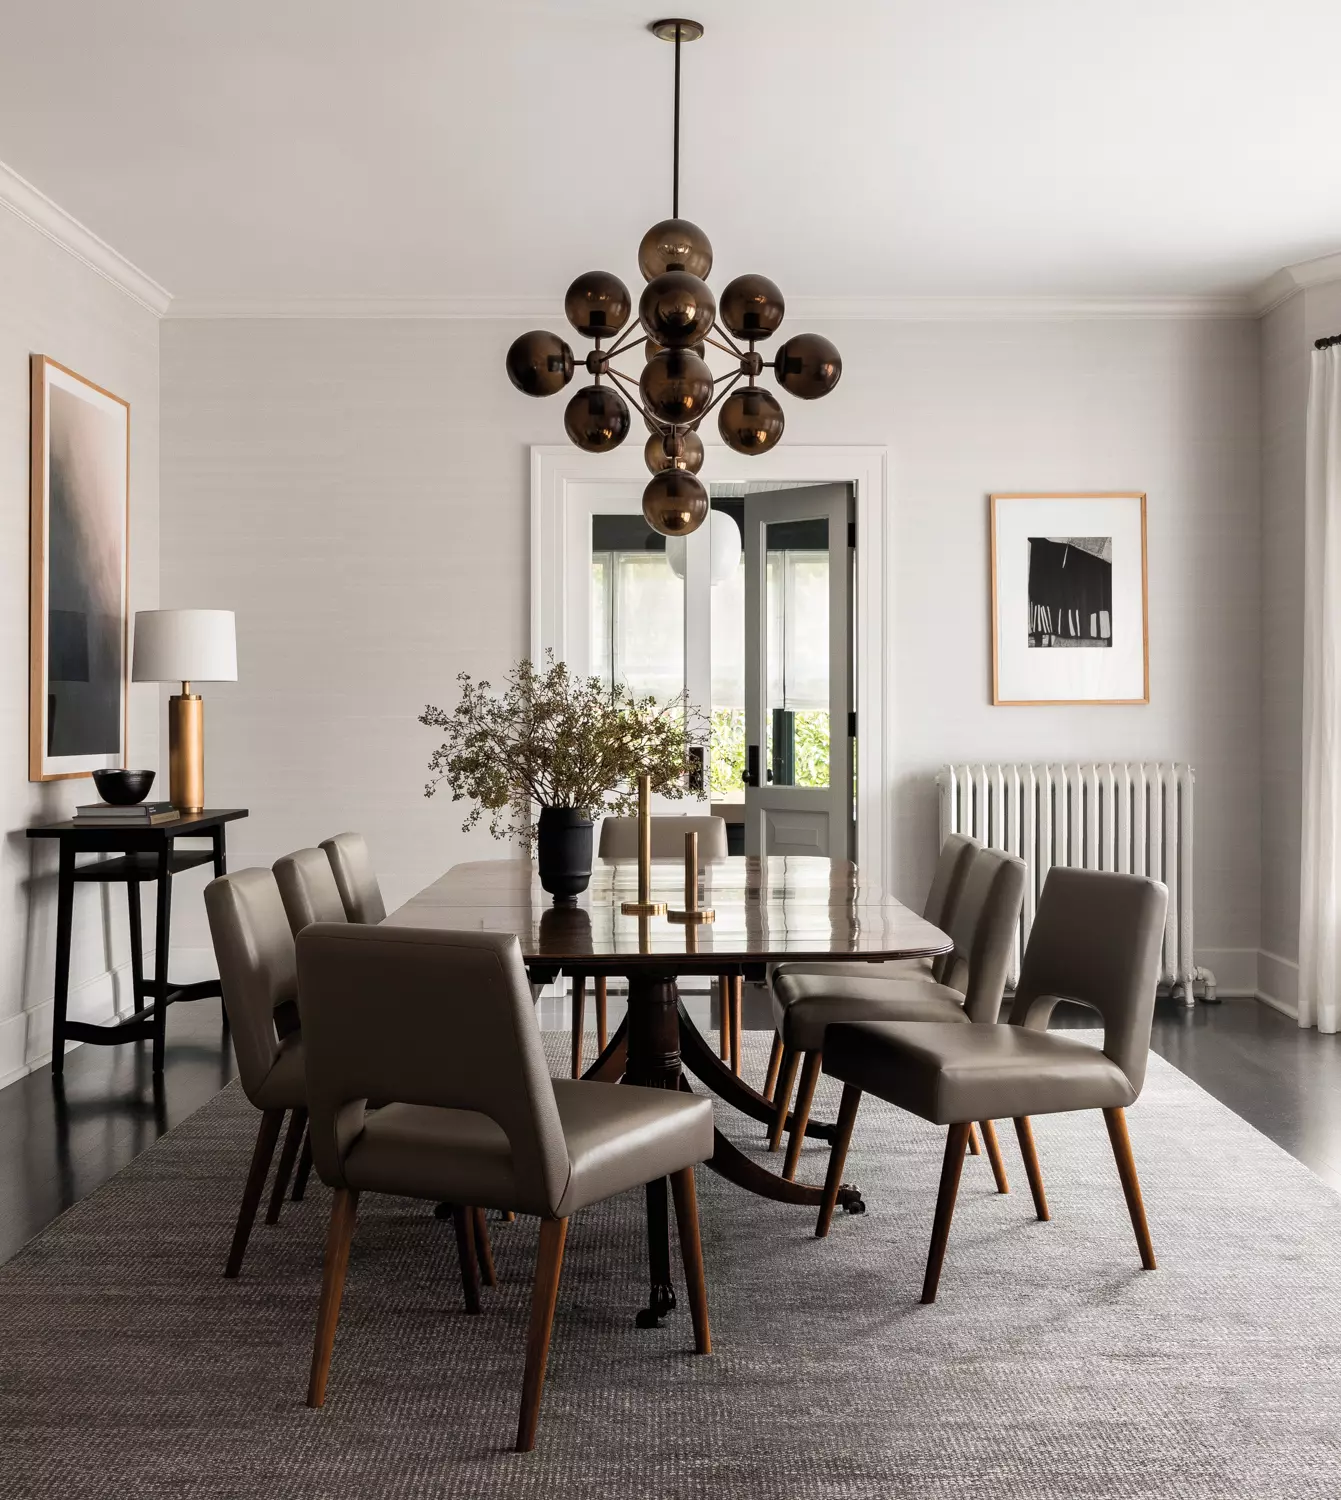 Dining room featuring a chandelier with smoked globes, long table and chairs